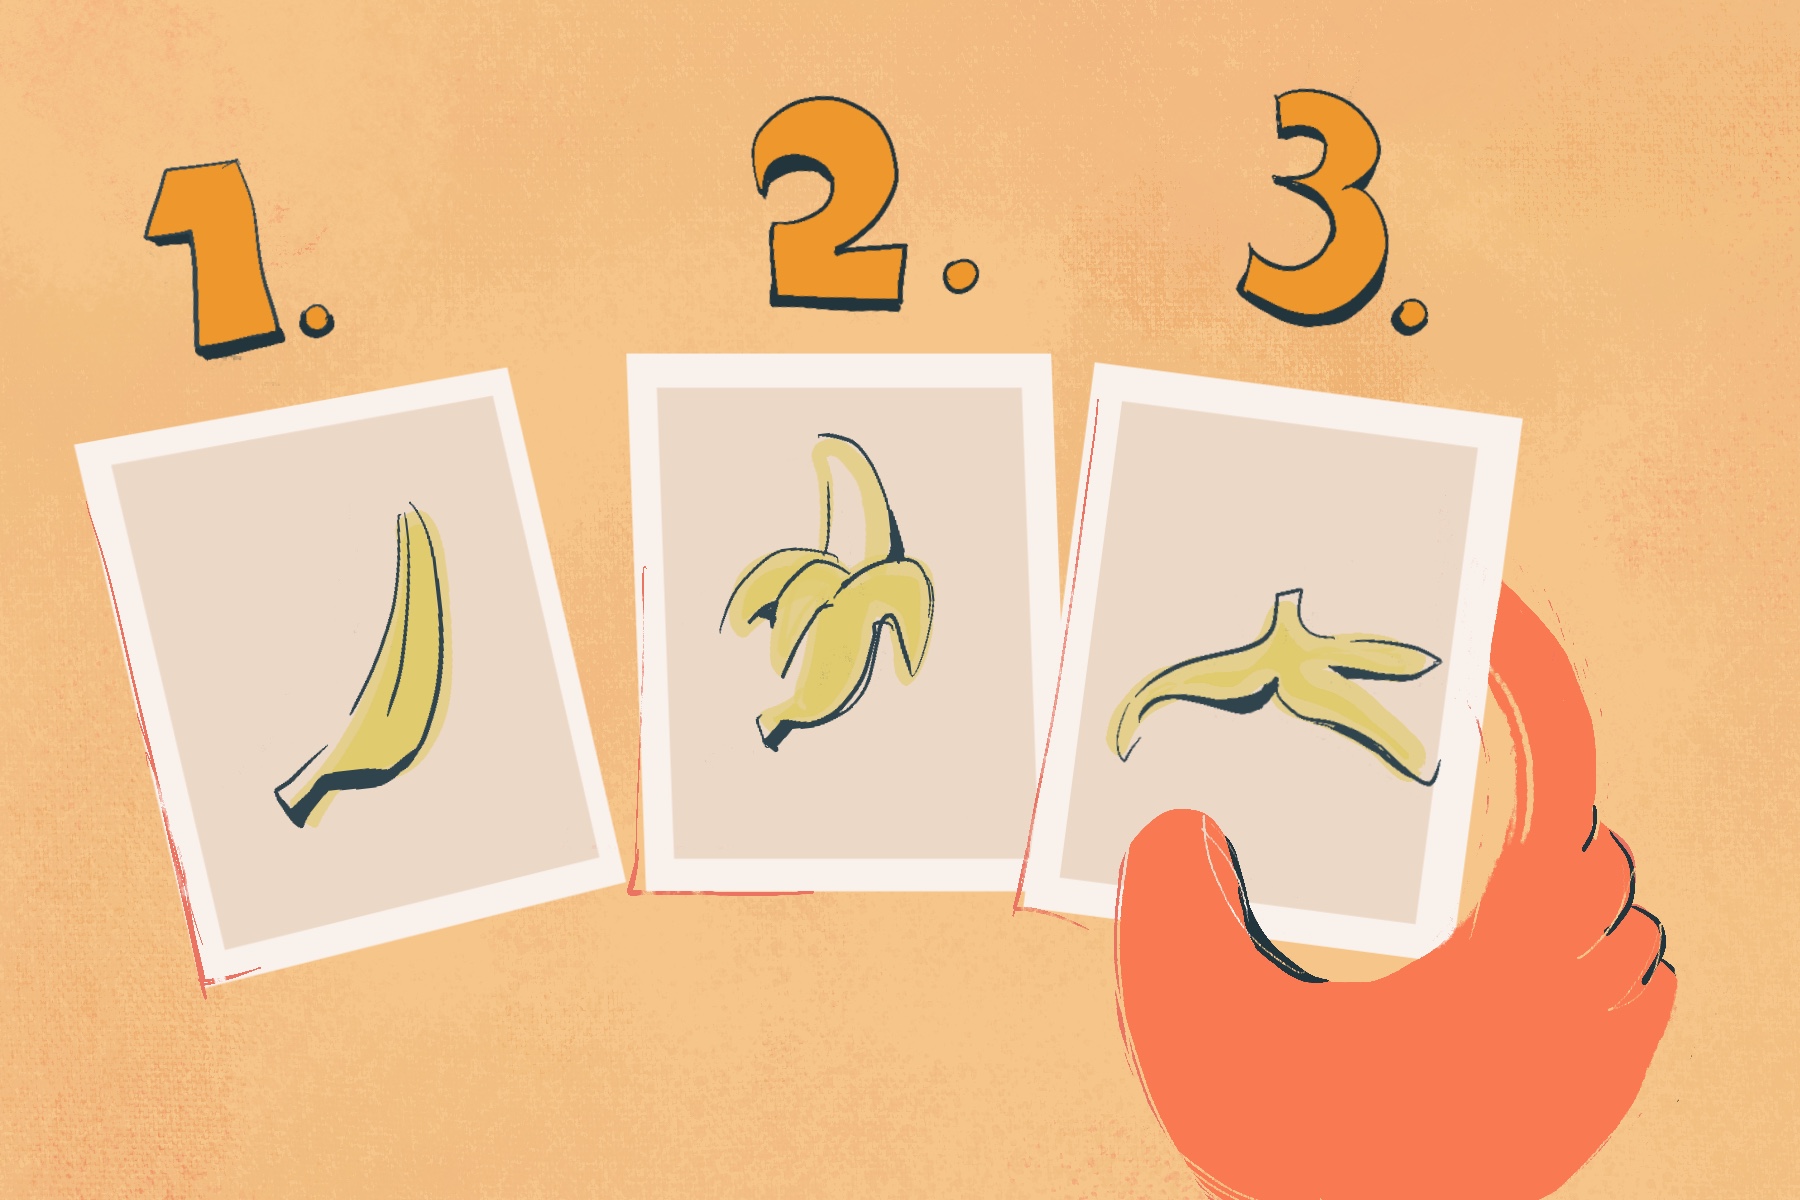 Illustration of three pictures of banana, one unpeeled, one half peeled and one with orange hand holding picture of banana peel